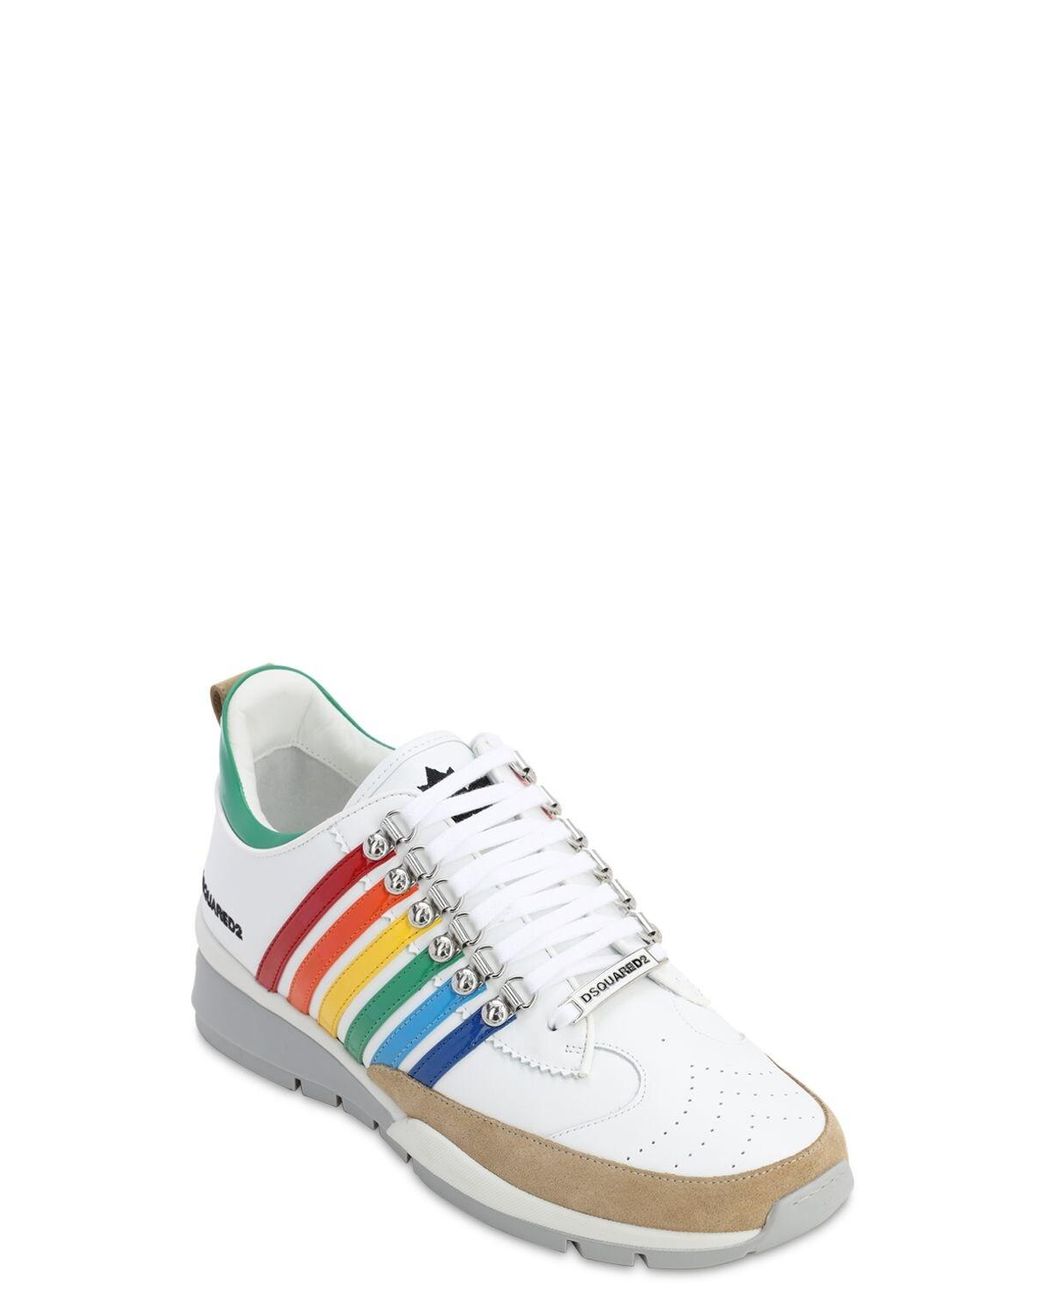 DSquared² Lvr Exclusive 251 Stripe Leather Sneaker in White/Rainbow (White)  for Men | Lyst